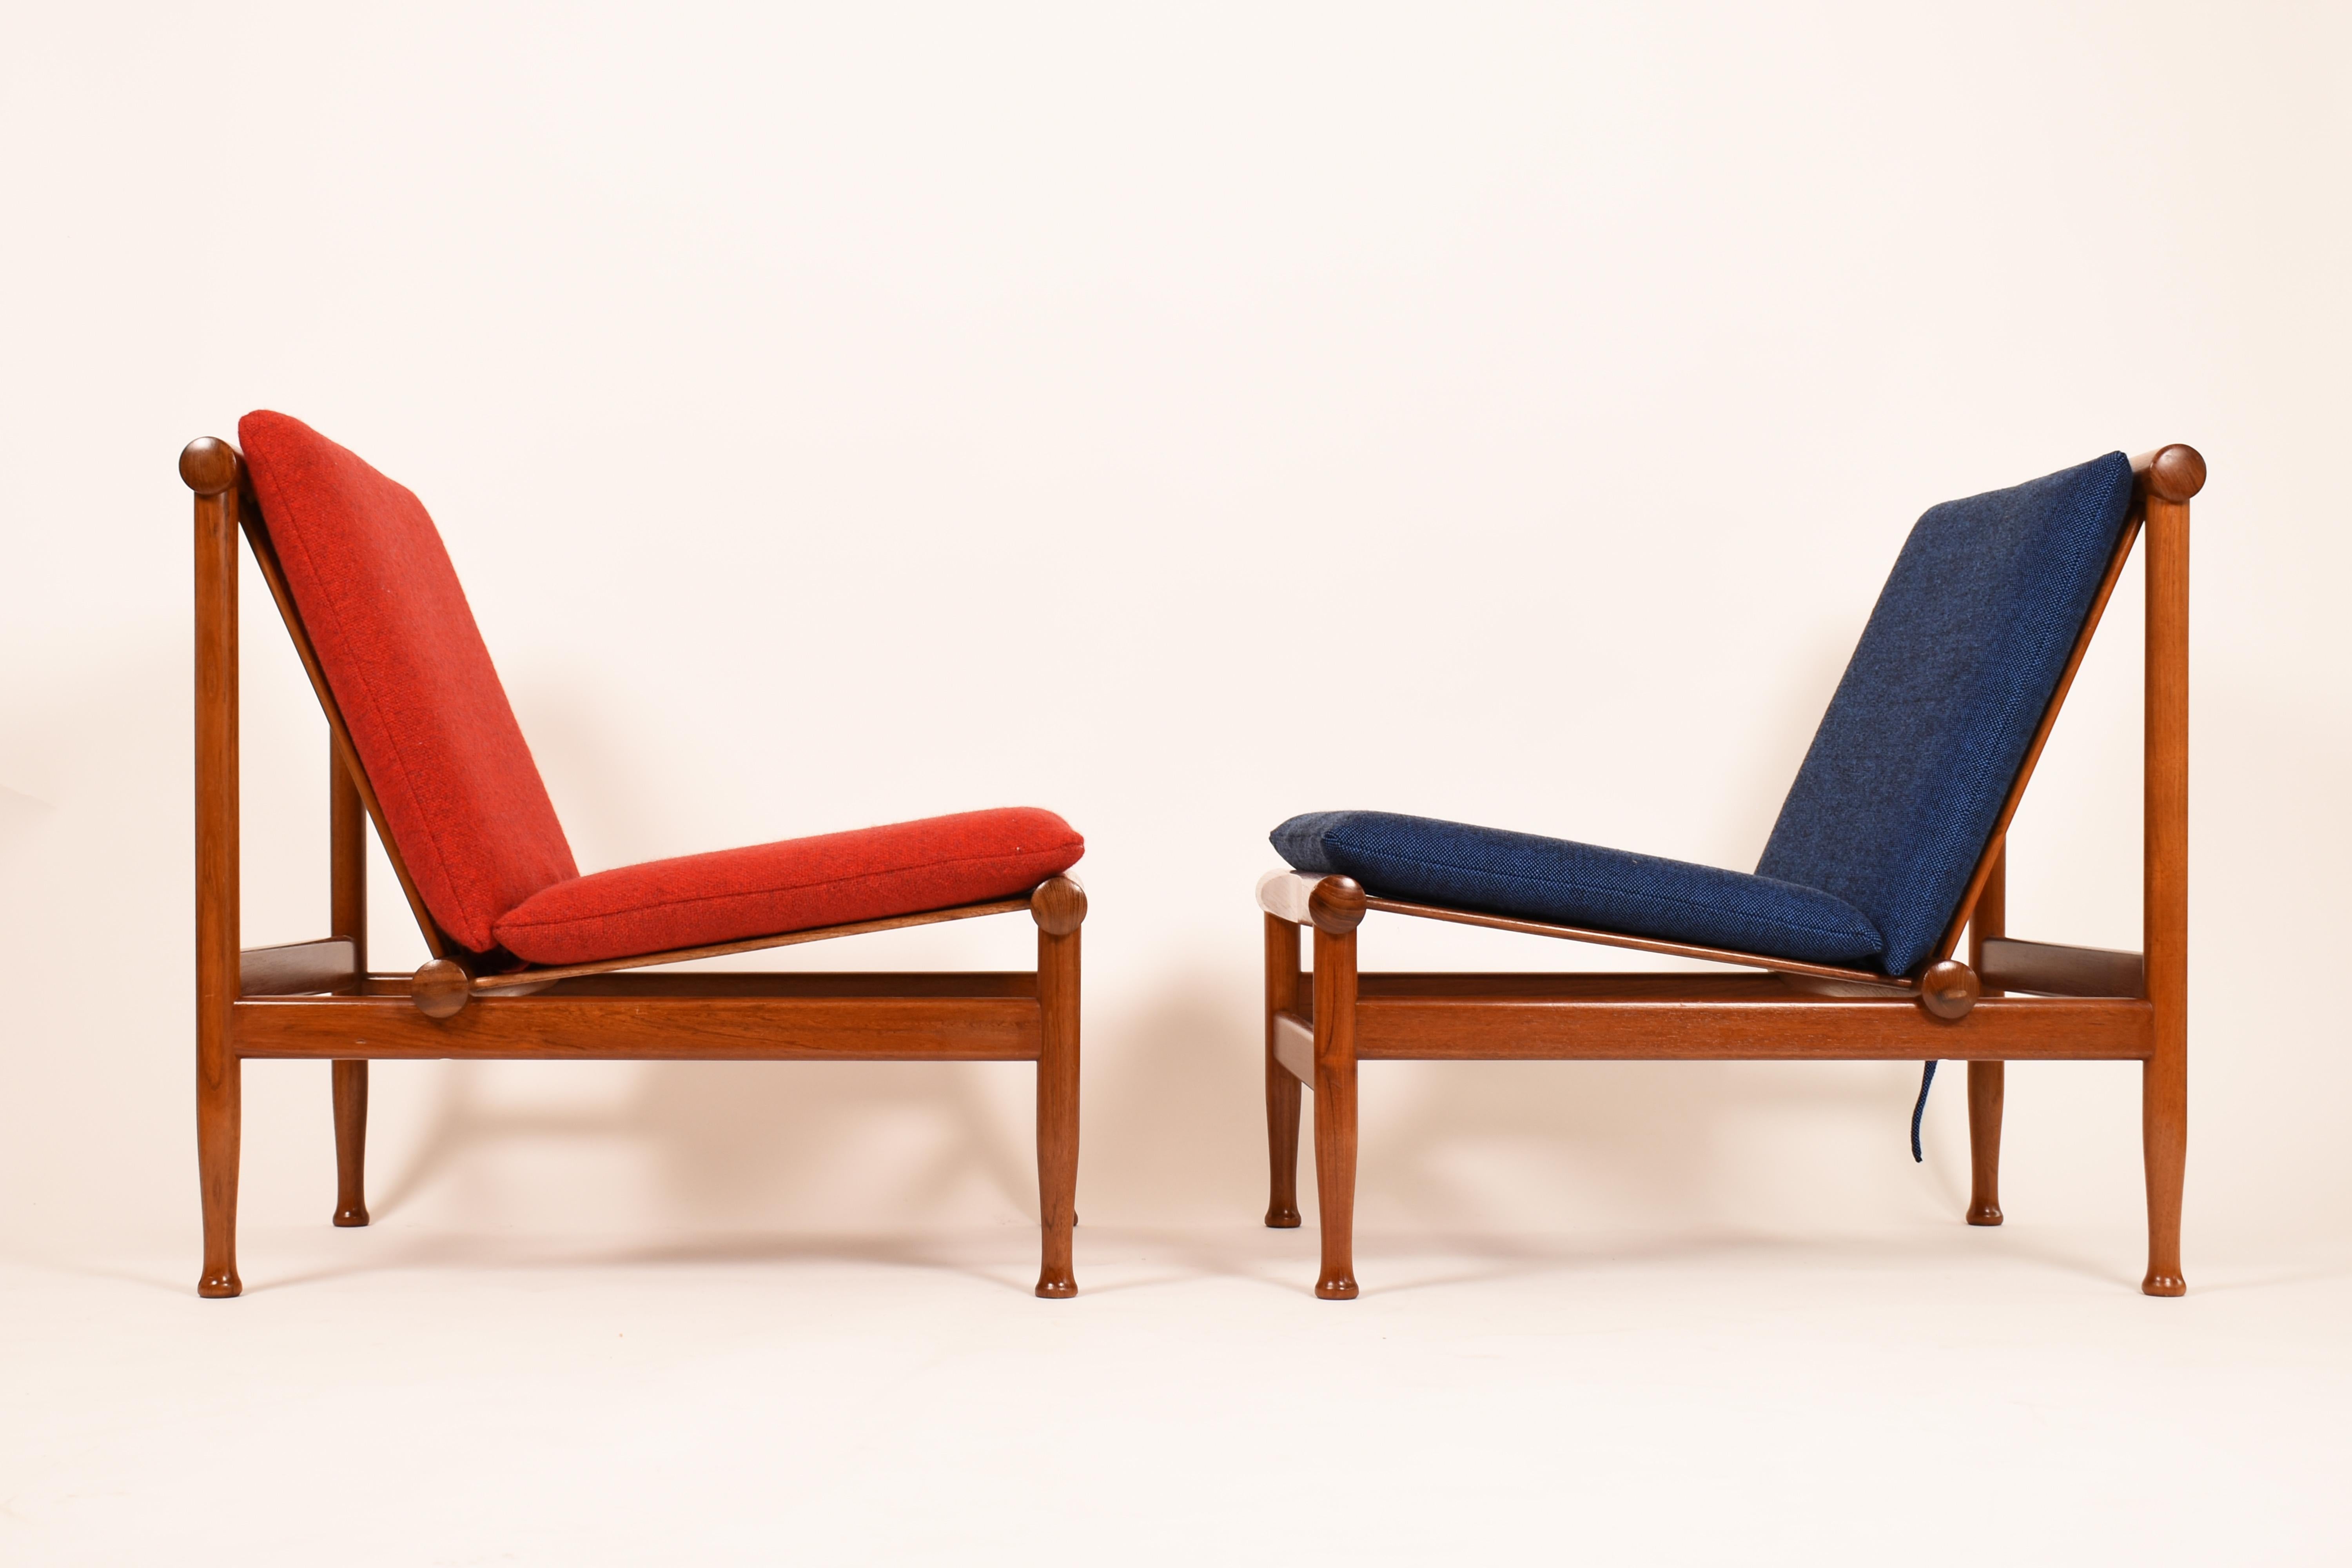 Set of two Mid-Century Modern lounge chairs.
Model 501, designed by Kai Lyngfeldt Larsen and produced in teak by Søborg Møbler, in Denmark, between 1960 and 1970.
Both seats are in very good condition, the structure underwent a refinishing with